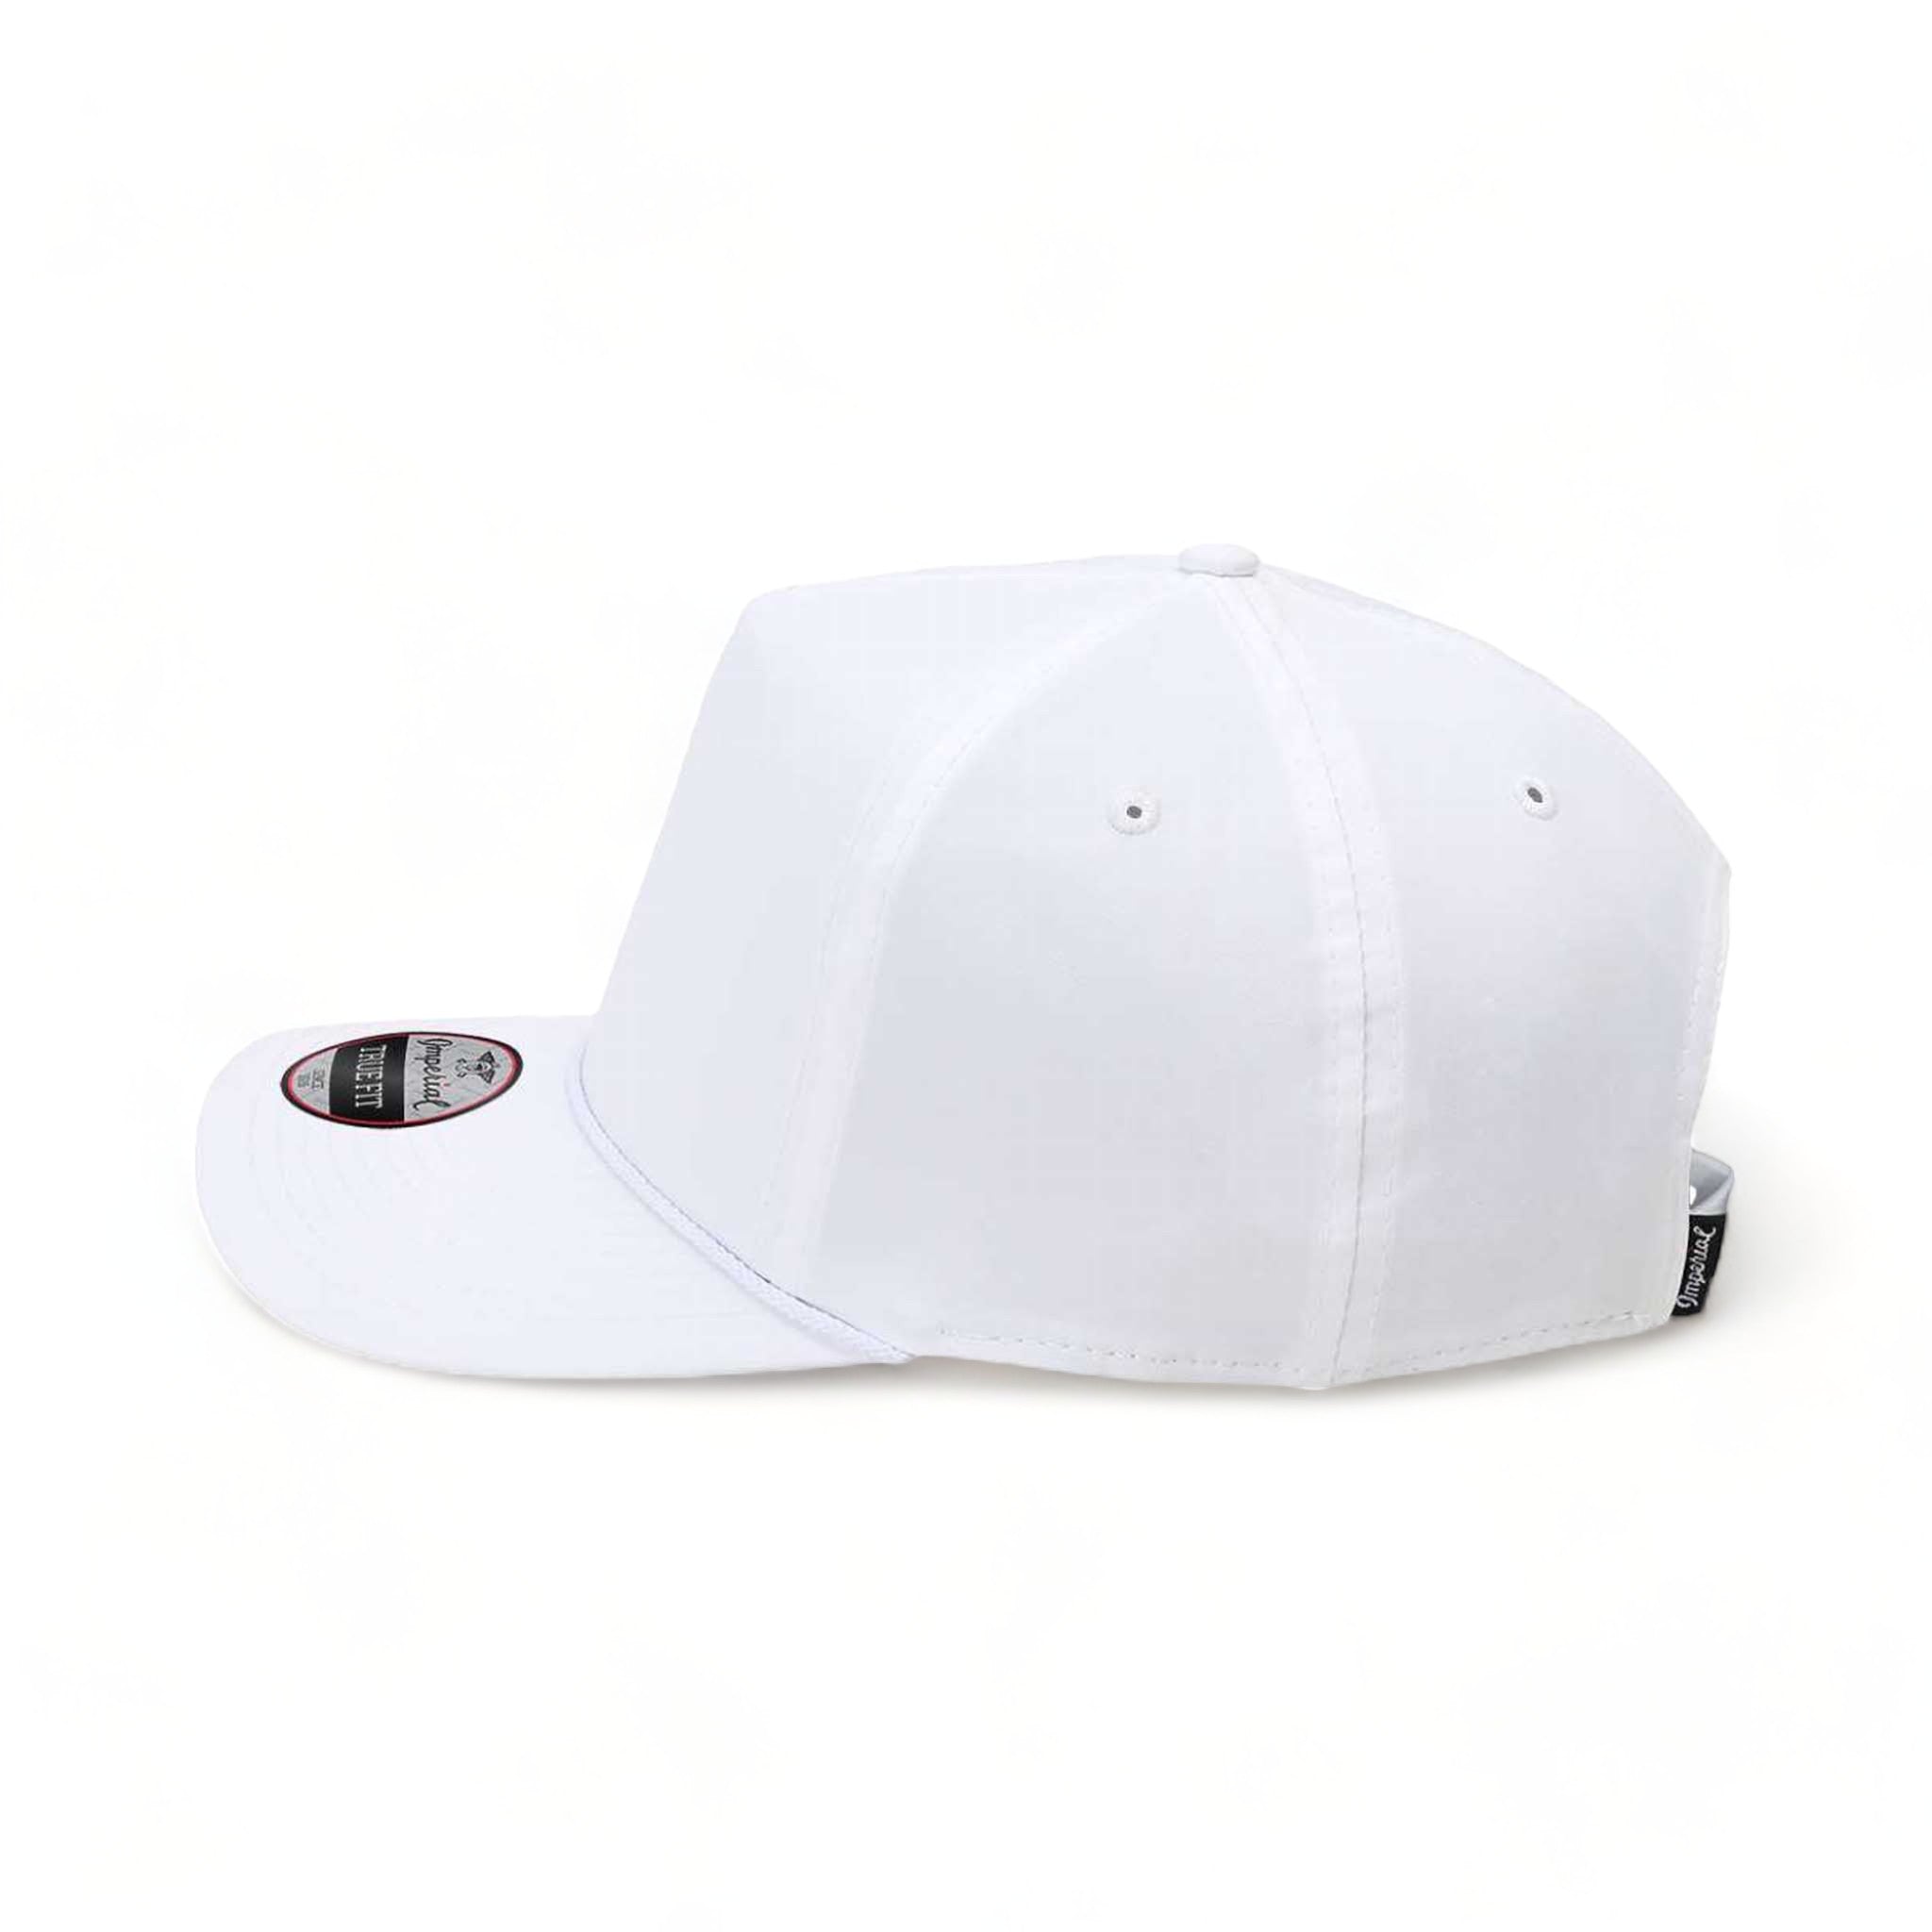 Side view of Imperial 5054 custom hat in white and white